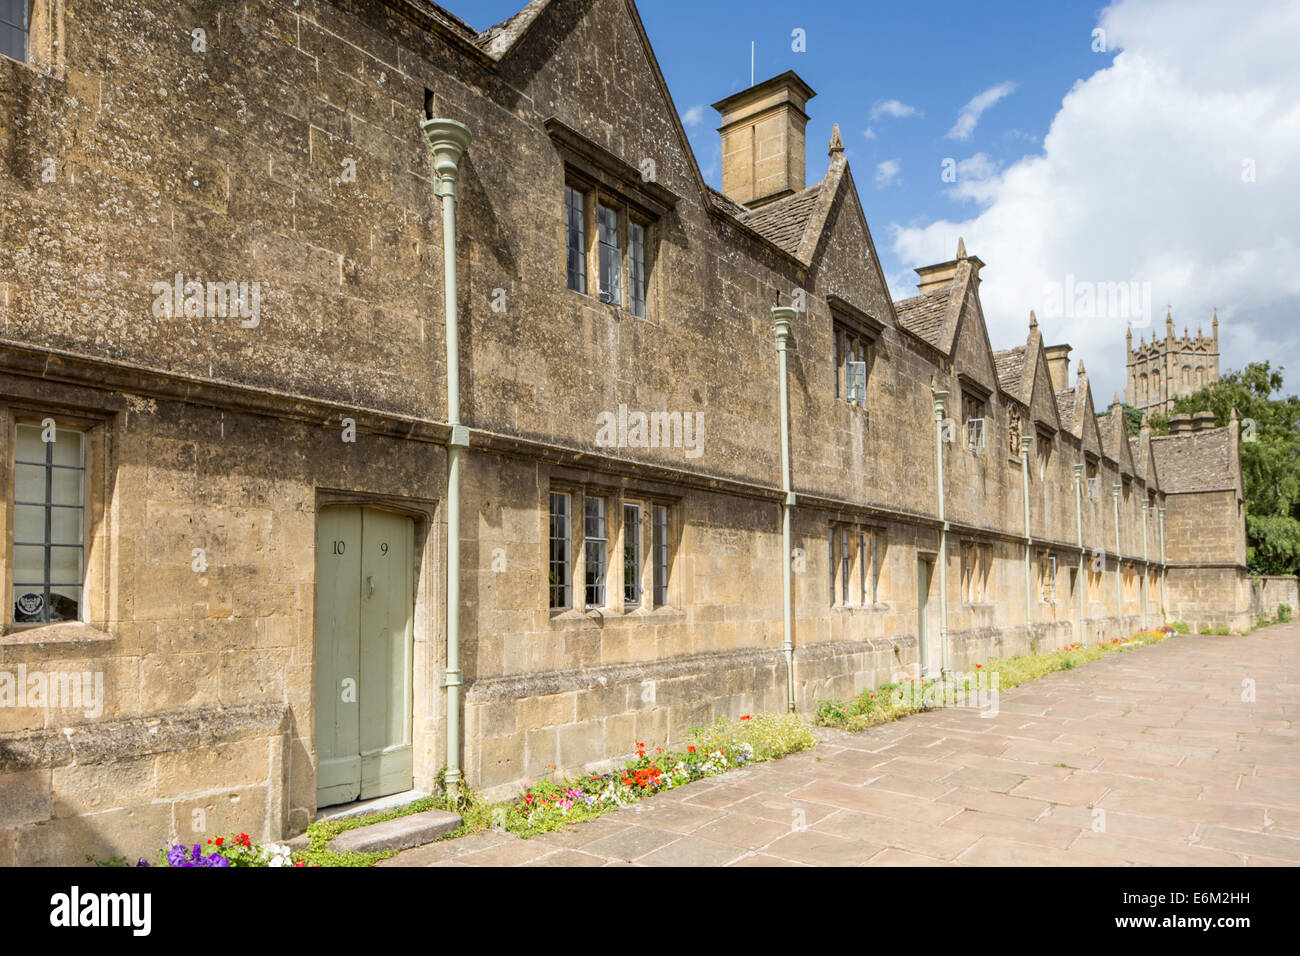 Almshouses in the Cotswold market town of Chipping Campden, Gloucestershire, England, UK Stock Photo